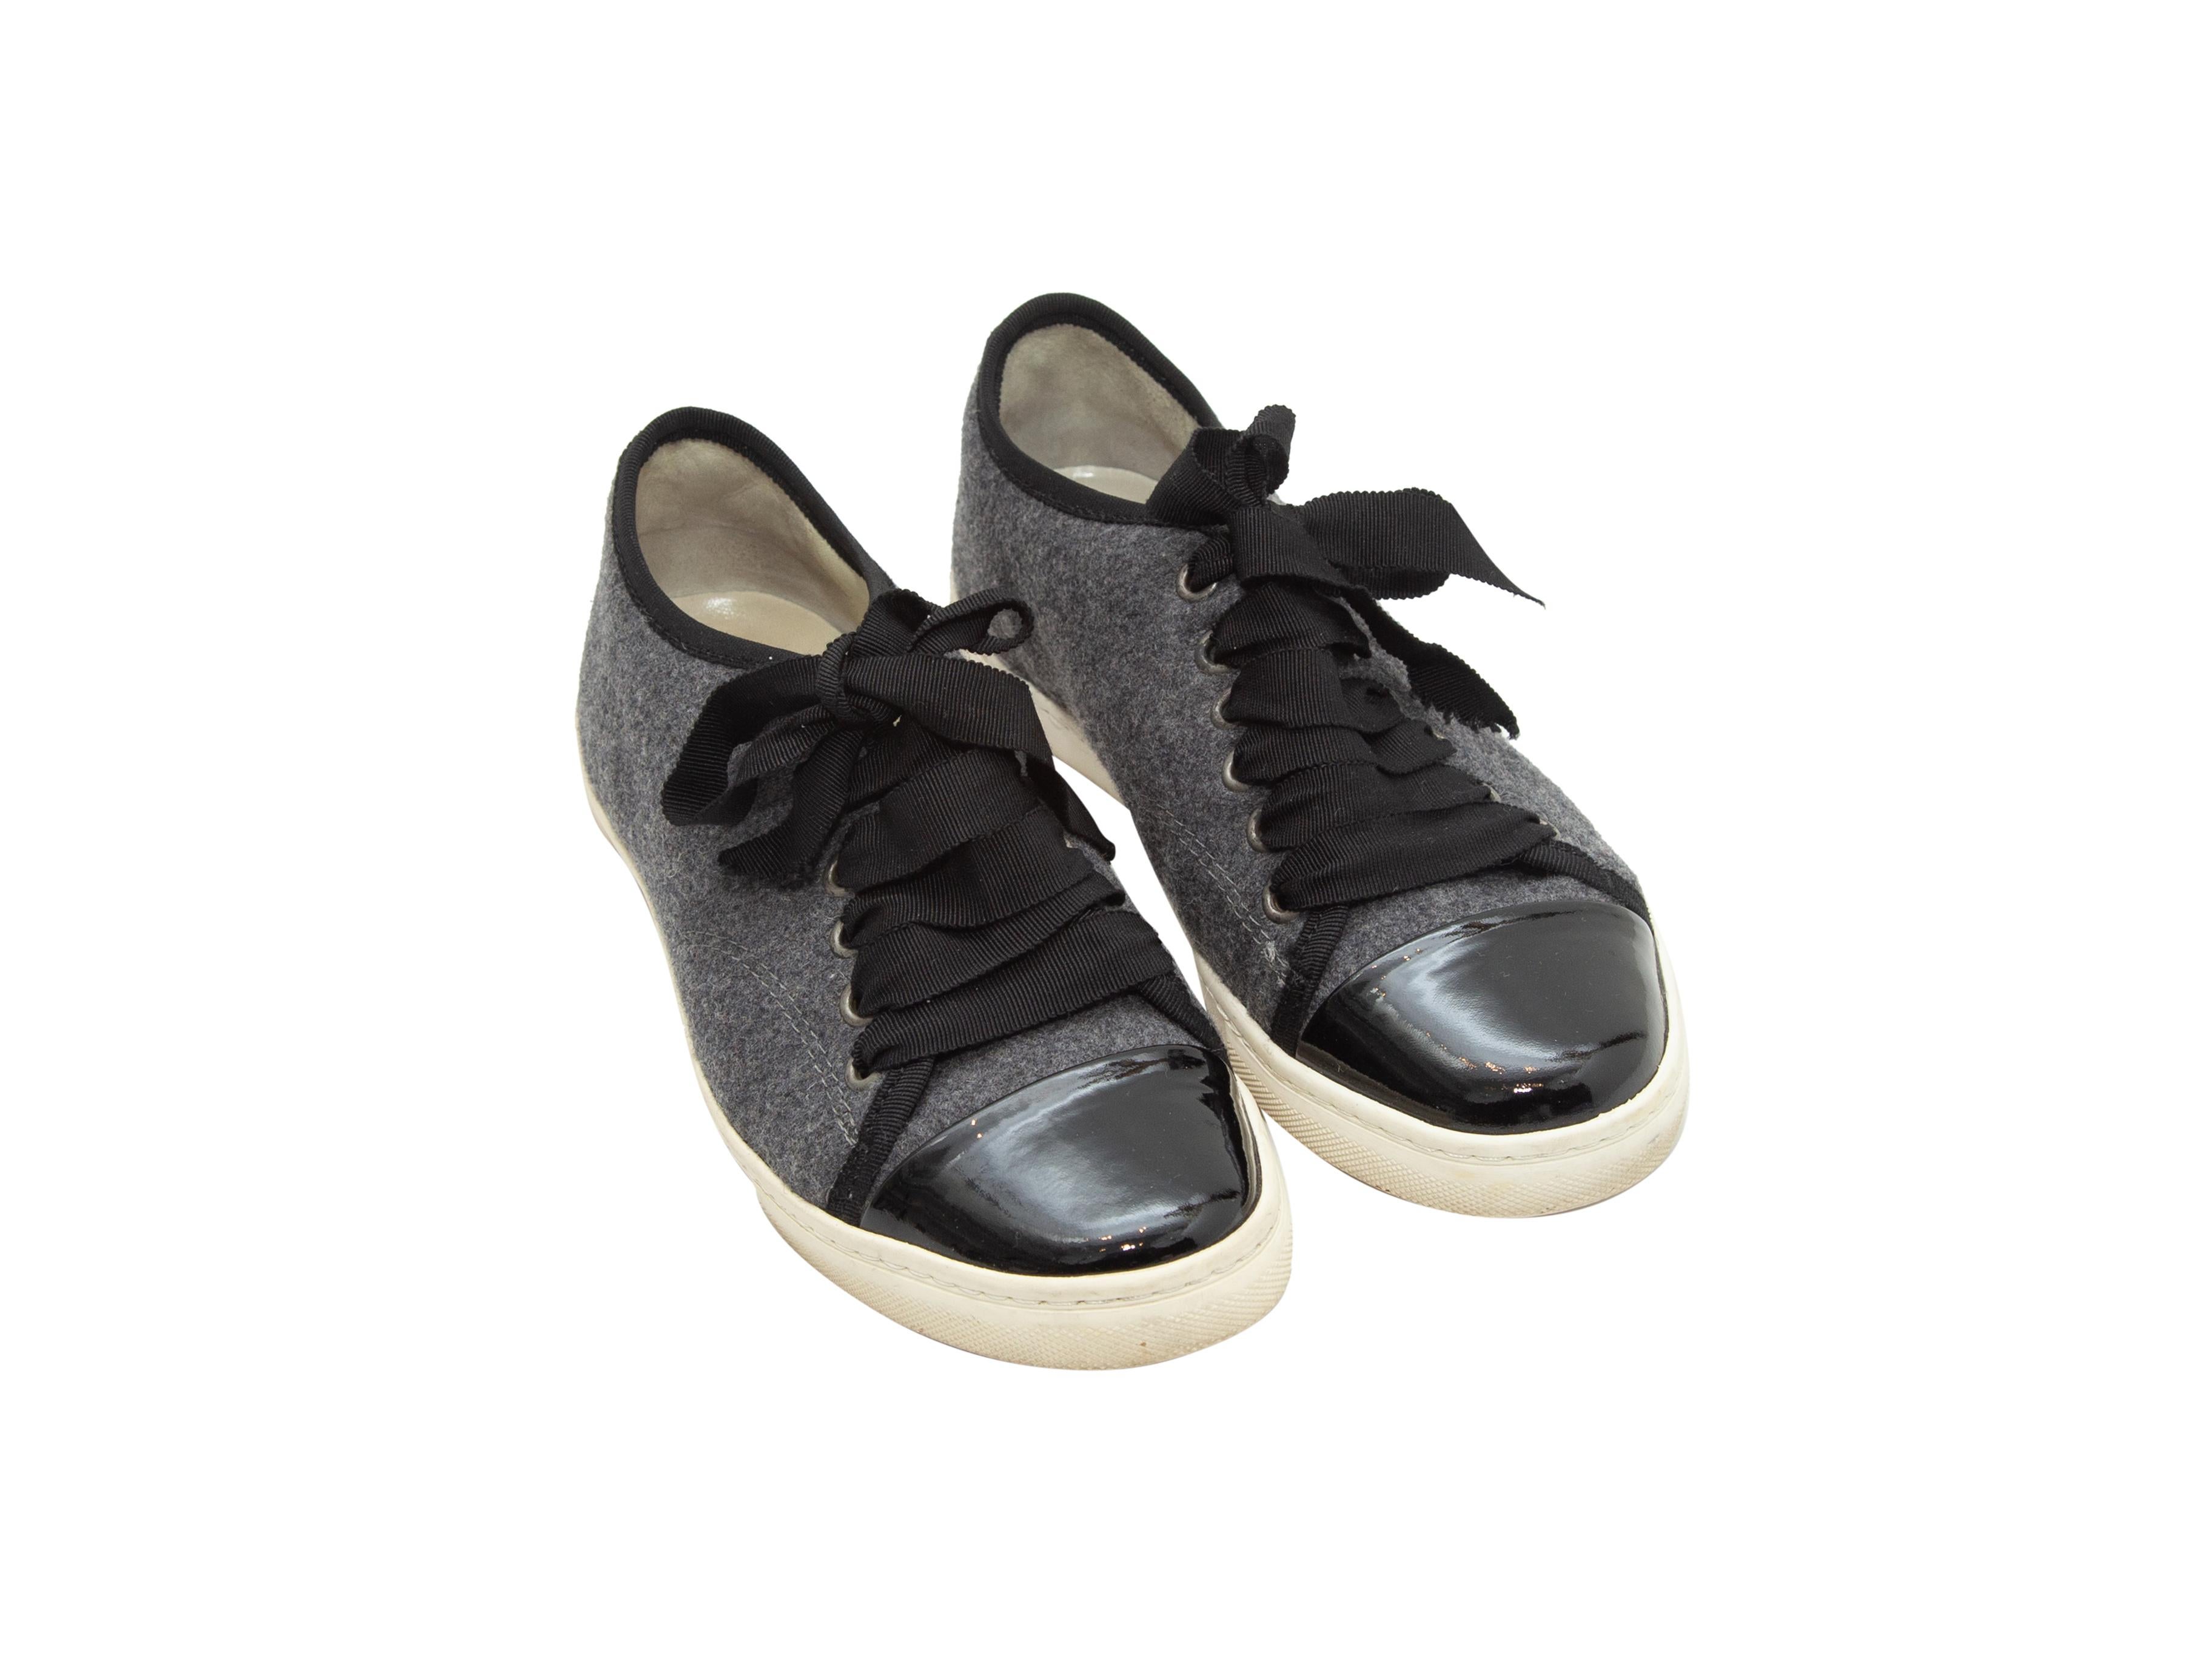 Product details: Grey wool and black patent leather cap-toe low-top sneakers by Lanvin. Rubber soles. Lace-up tie closures at tops. Designer size 36.5.
Condition: Pre-owned. Very good. Wear at soles. Slight wear at inner soles.